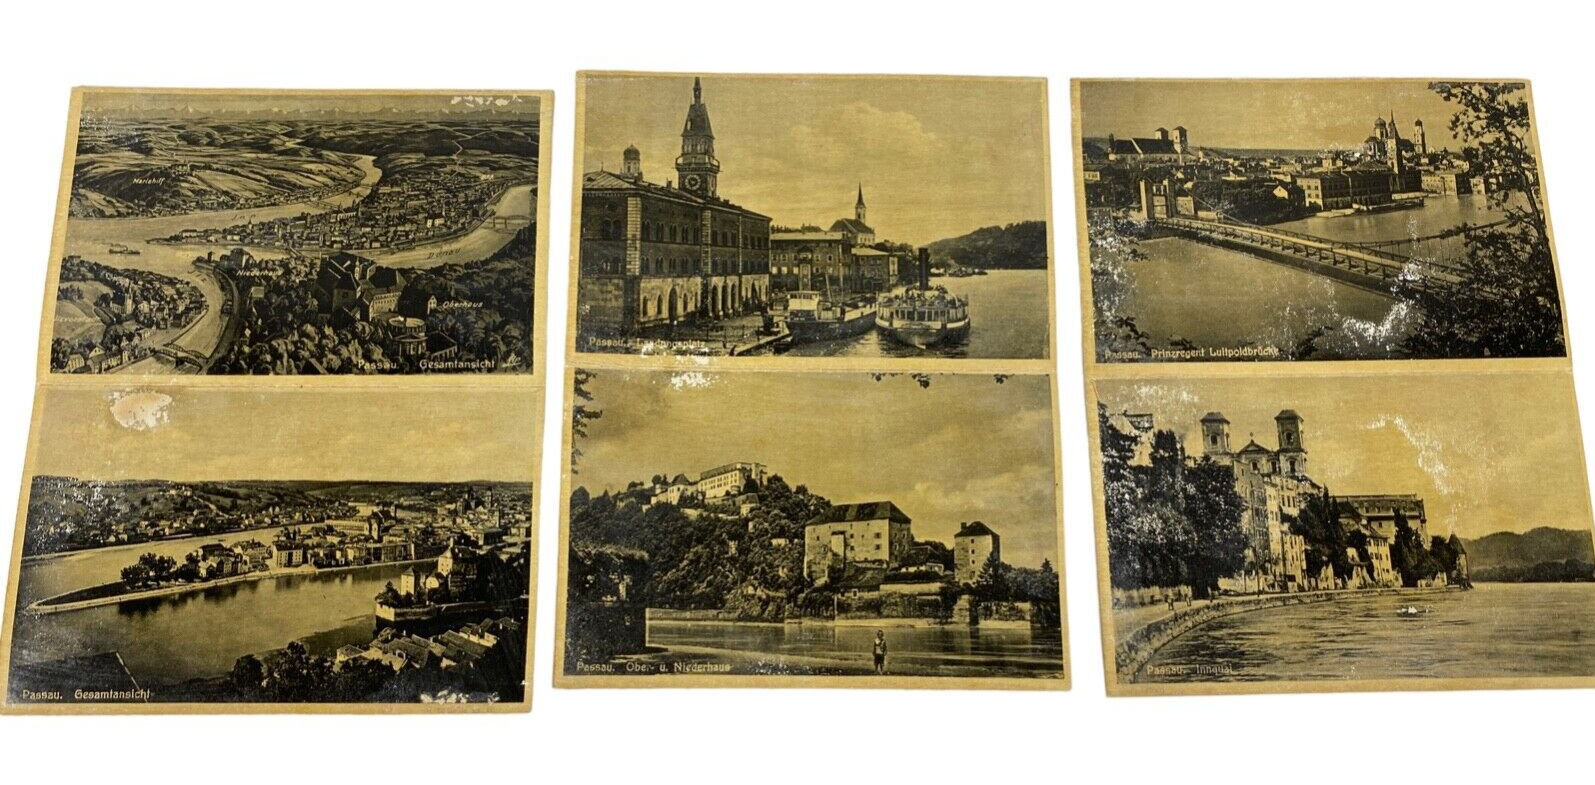 Antique Postcards Scenes From Passau, Germany Set of 6